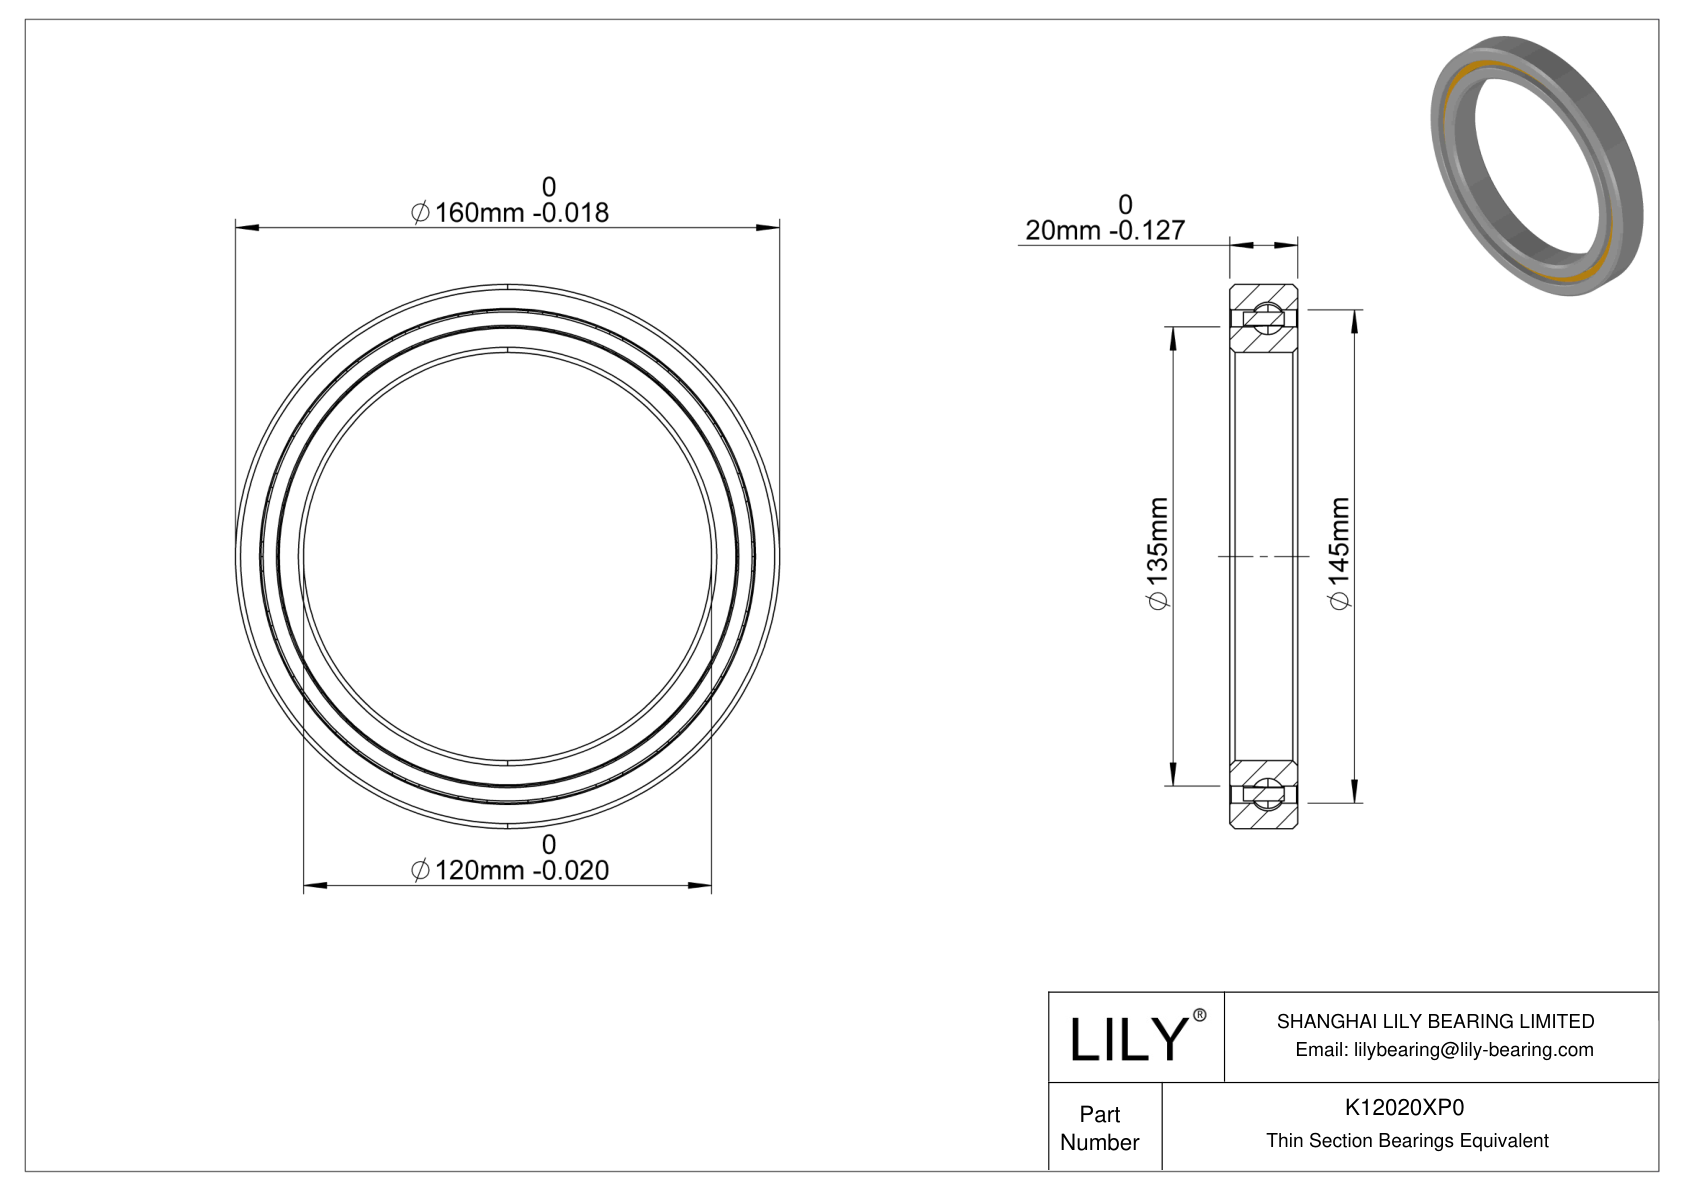 K12020XP0 Constant Section (CS) Bearings cad drawing